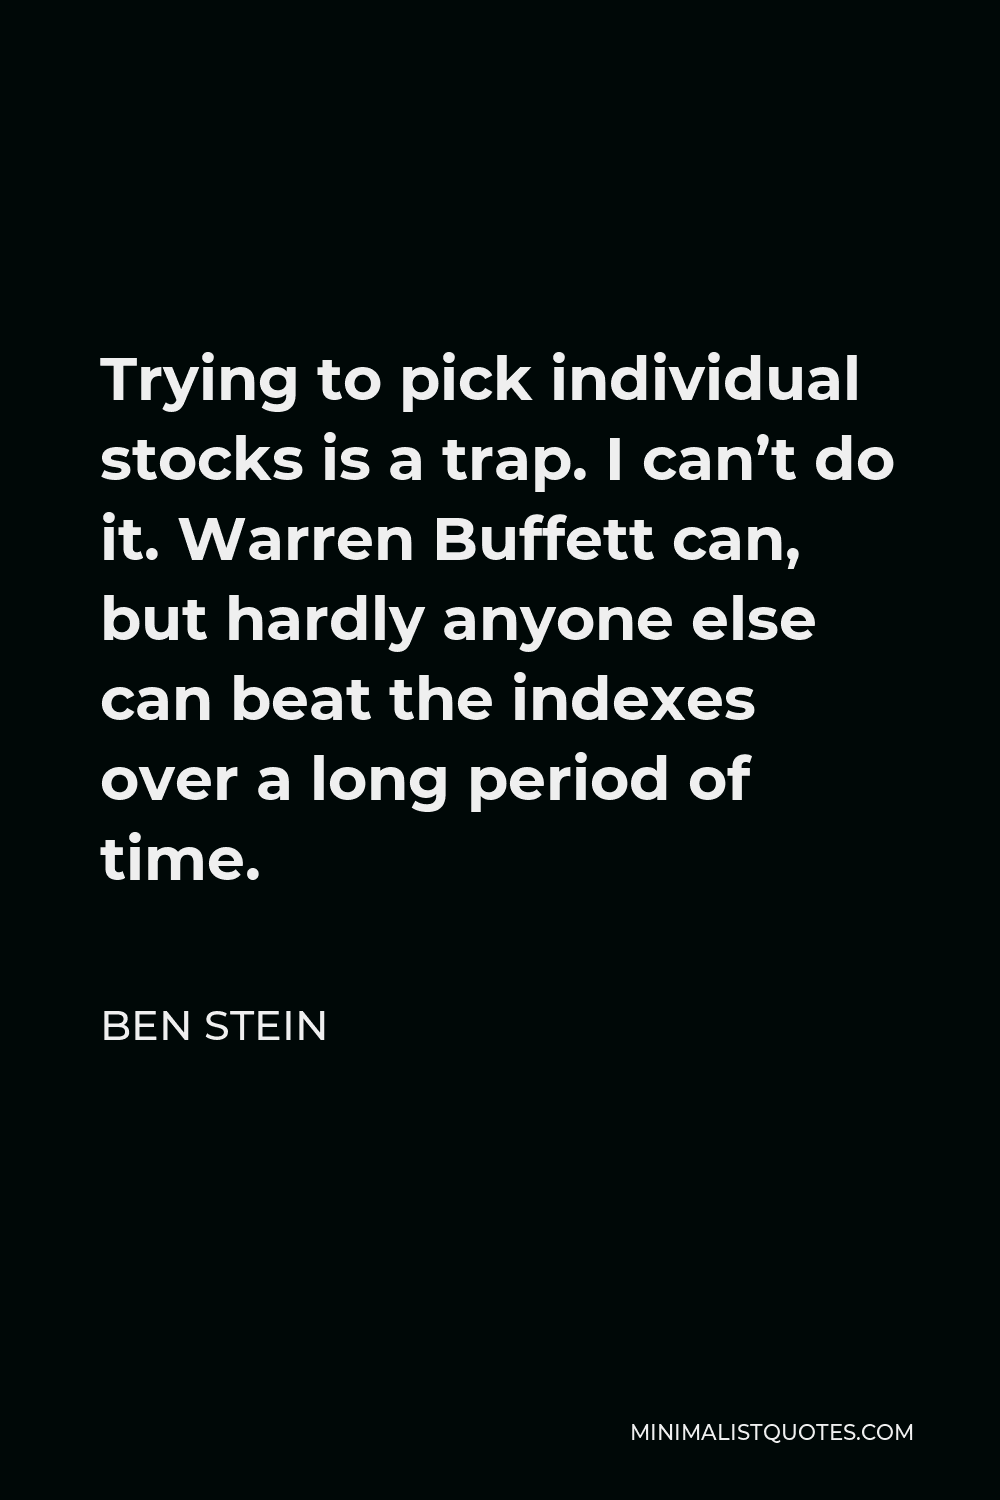 Ben Stein Quote - Trying to pick individual stocks is a trap. I can’t do it. Warren Buffett can, but hardly anyone else can beat the indexes over a long period of time.